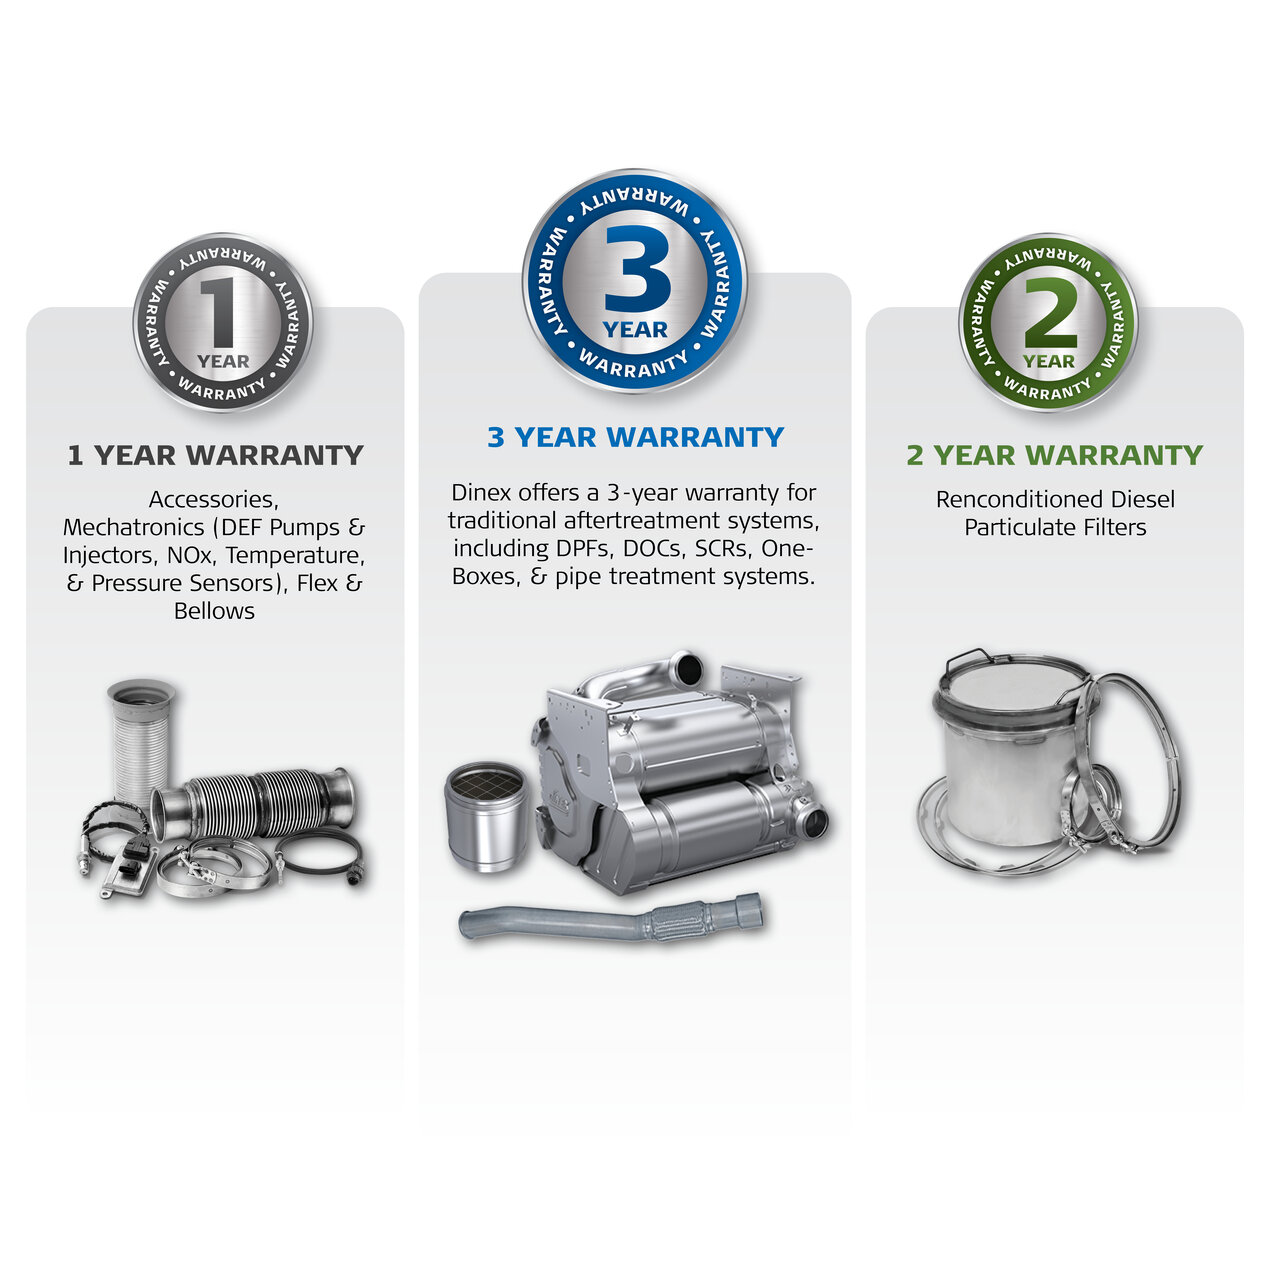 Dinex offers 1, 2, and 3 year warranties